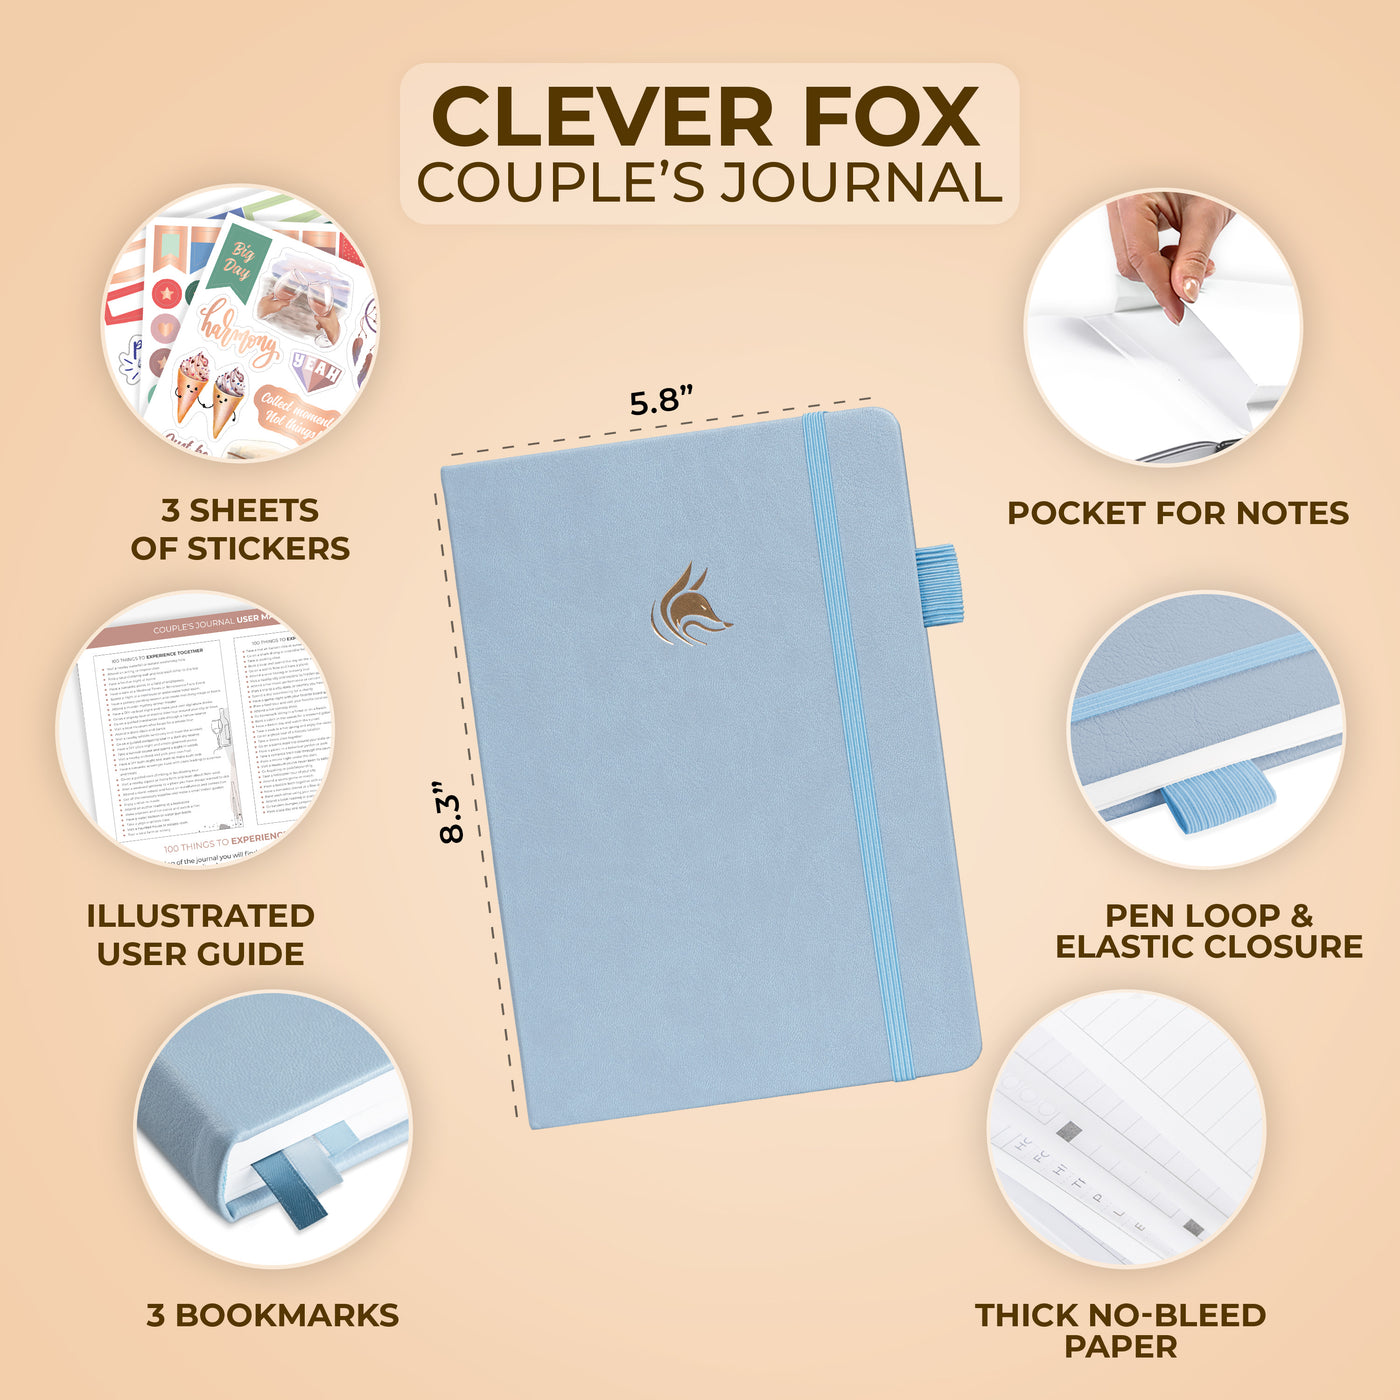 Couple's Journal – Clever Fox®